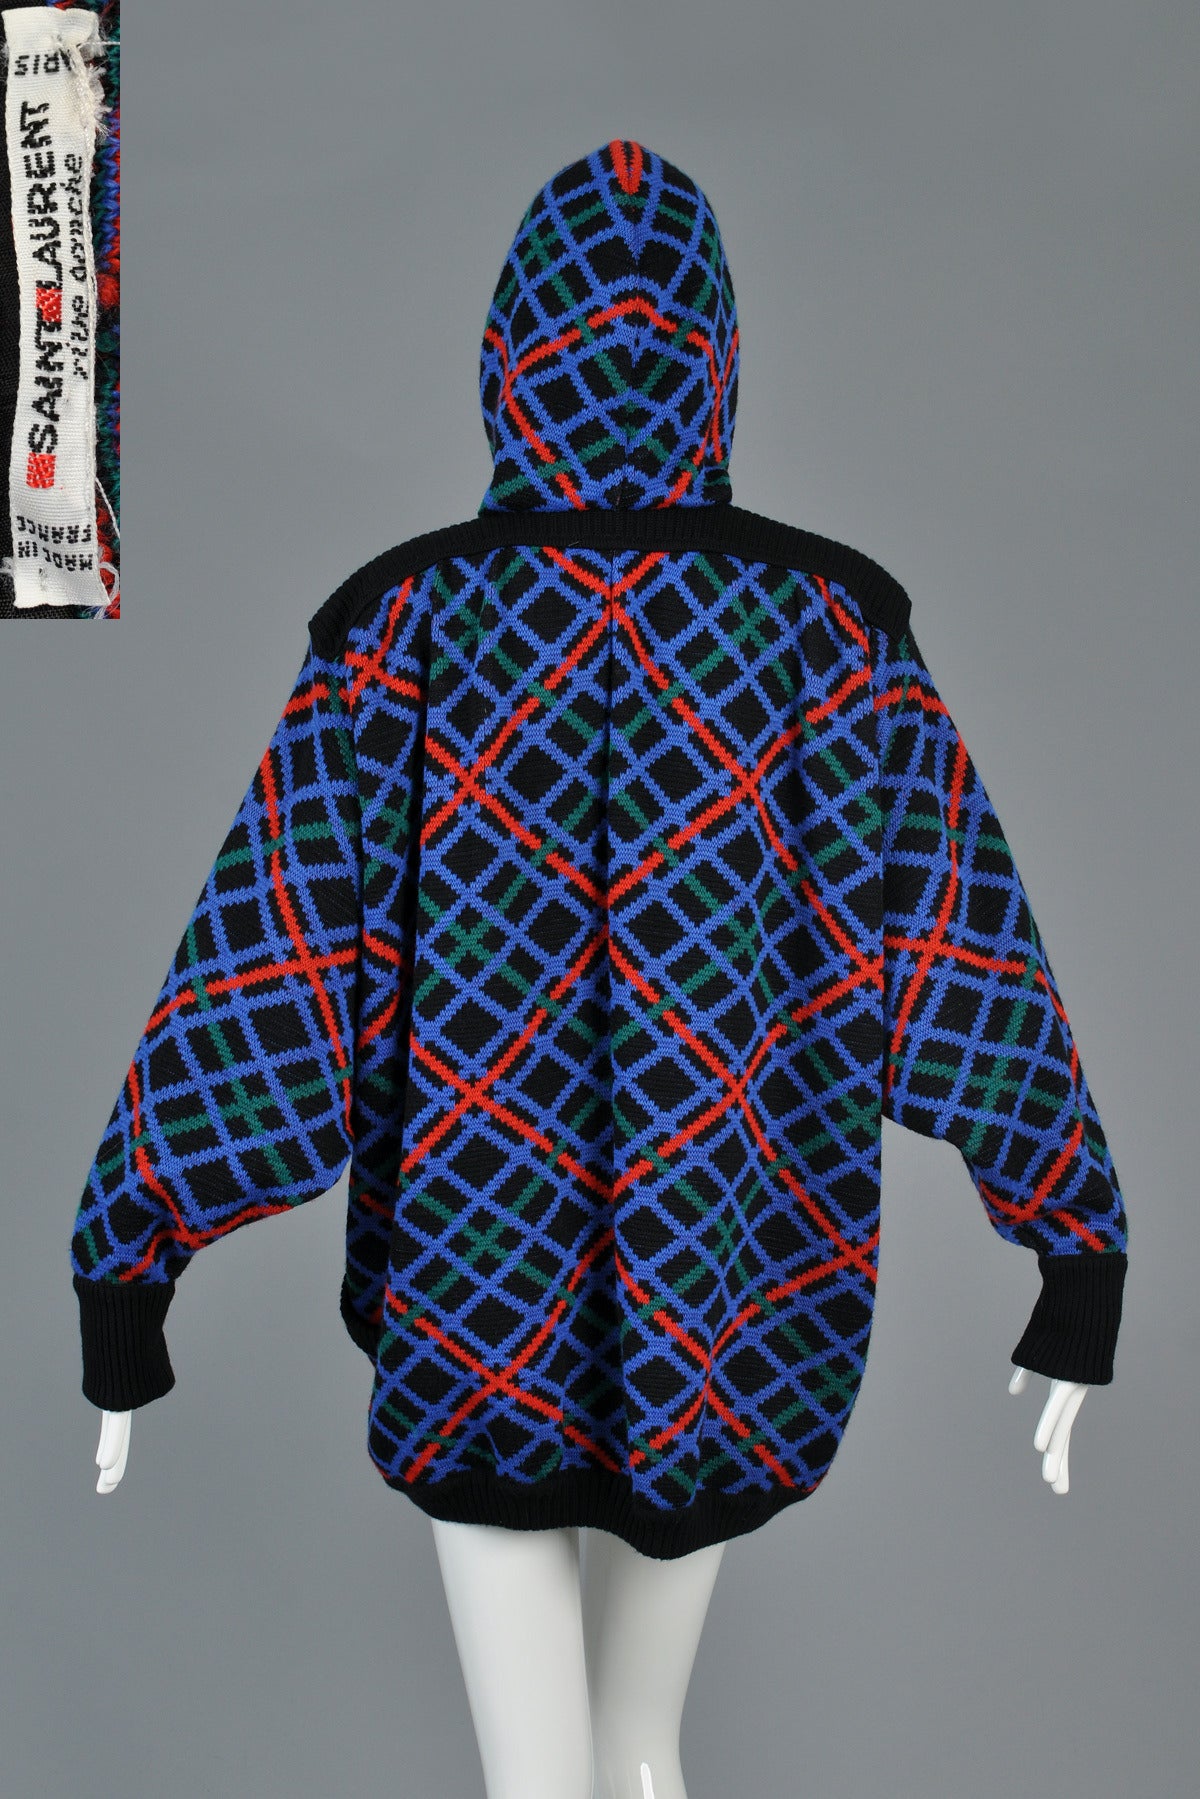 Yves Saint Laurent 1980s Plaid Hooded Knit Cocoon Jacket 6